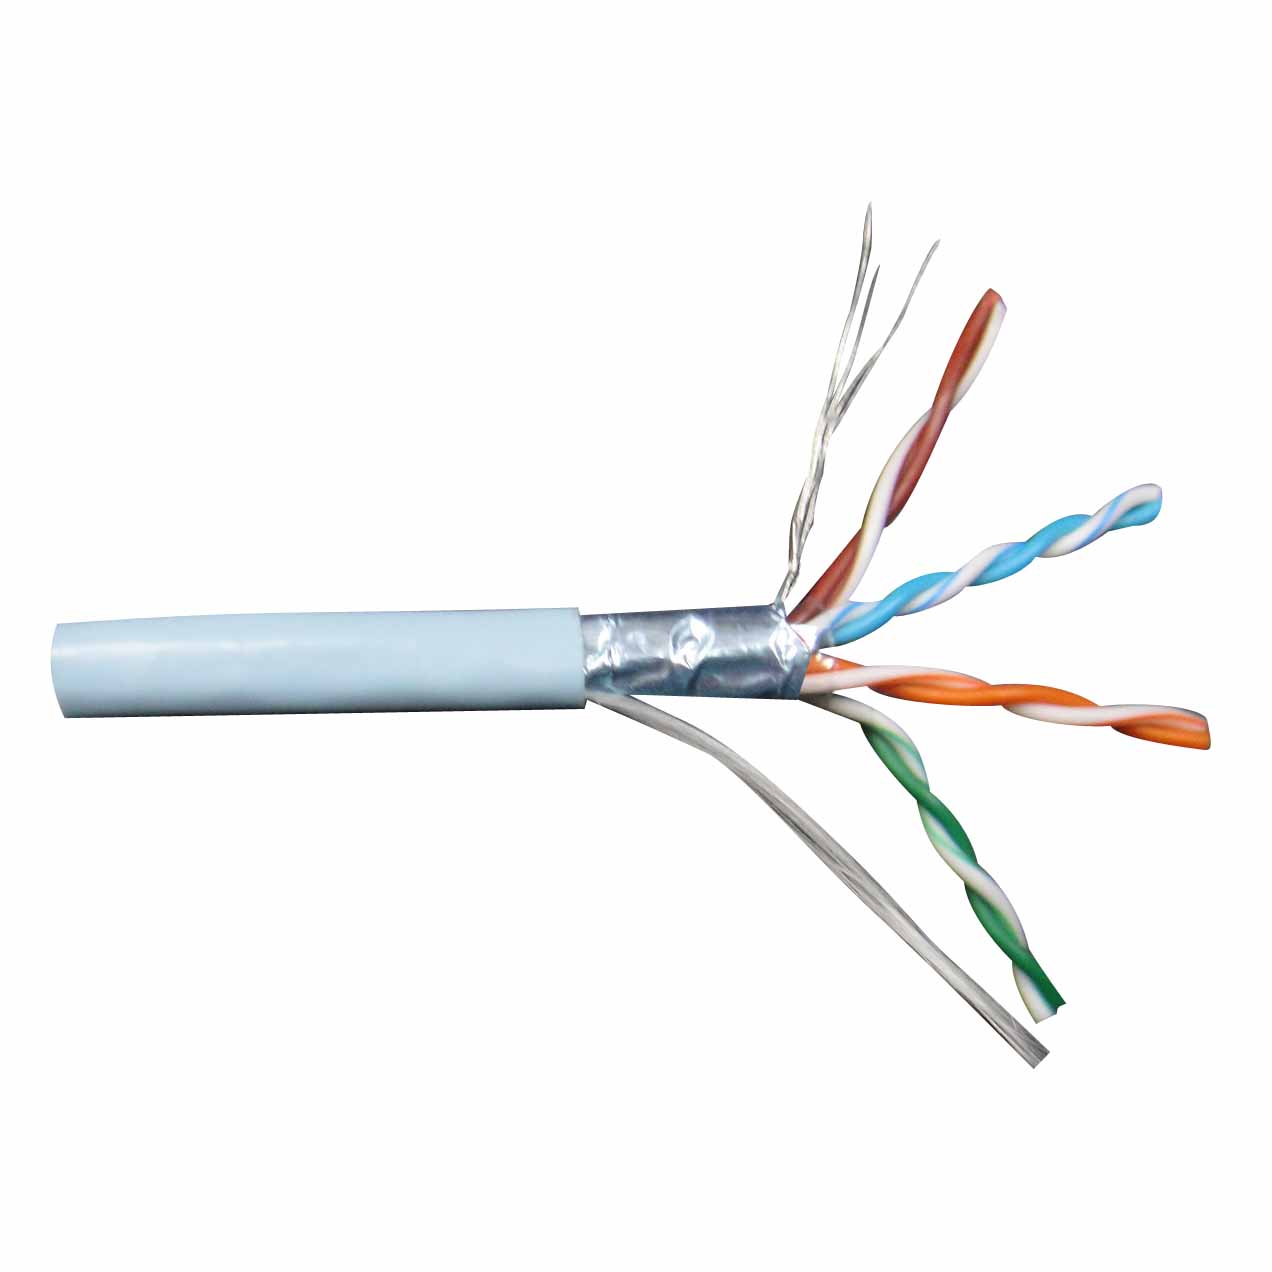 LAN Cable FTP Cat.5e Solid 24AWG 305M/Box Copper System LAN Cable